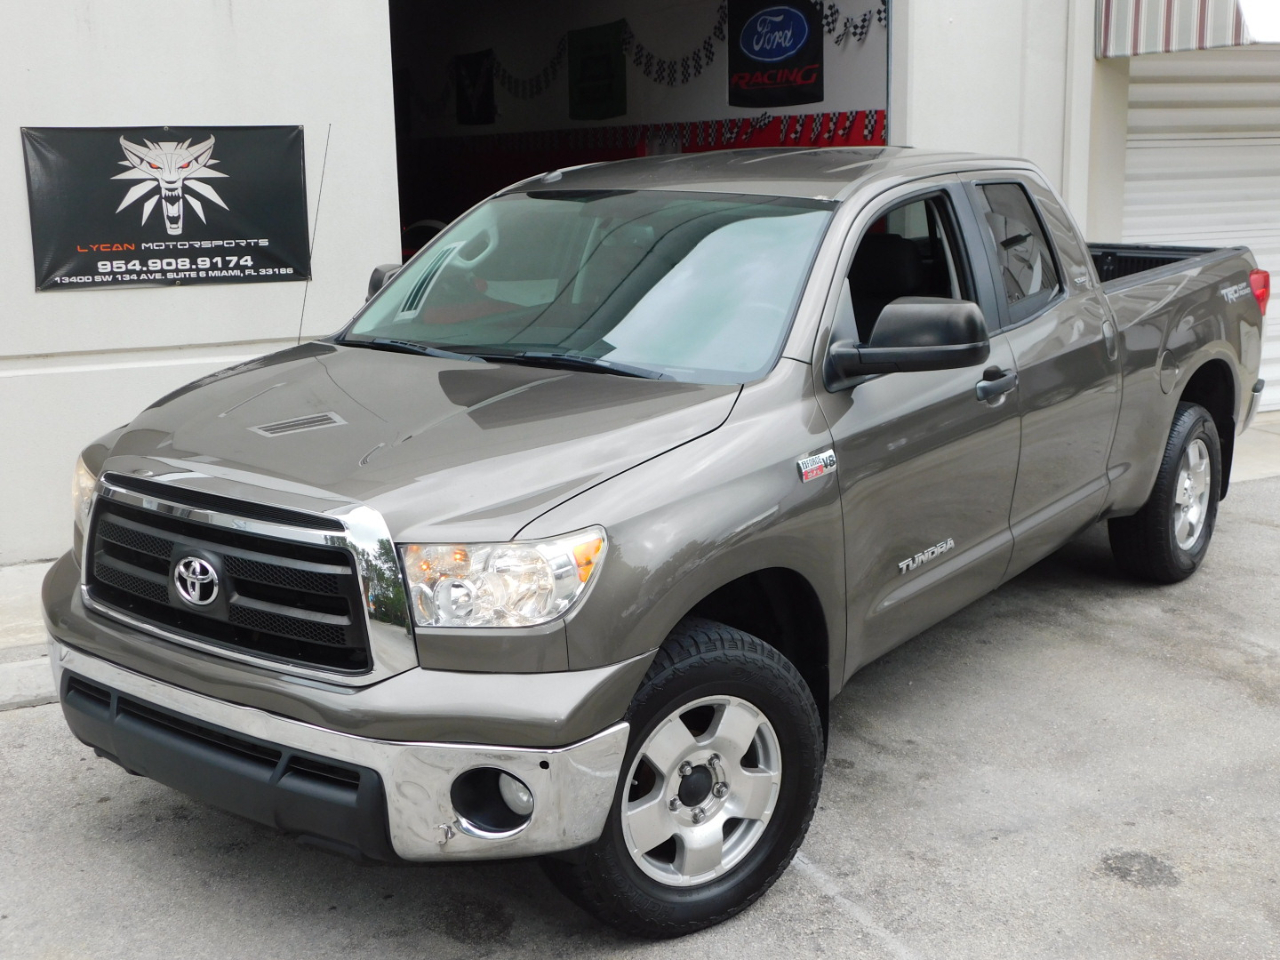 Used 2011 Toyota Tundra Tundra-Grade 5.7L Double Cab 4WD for Sale in